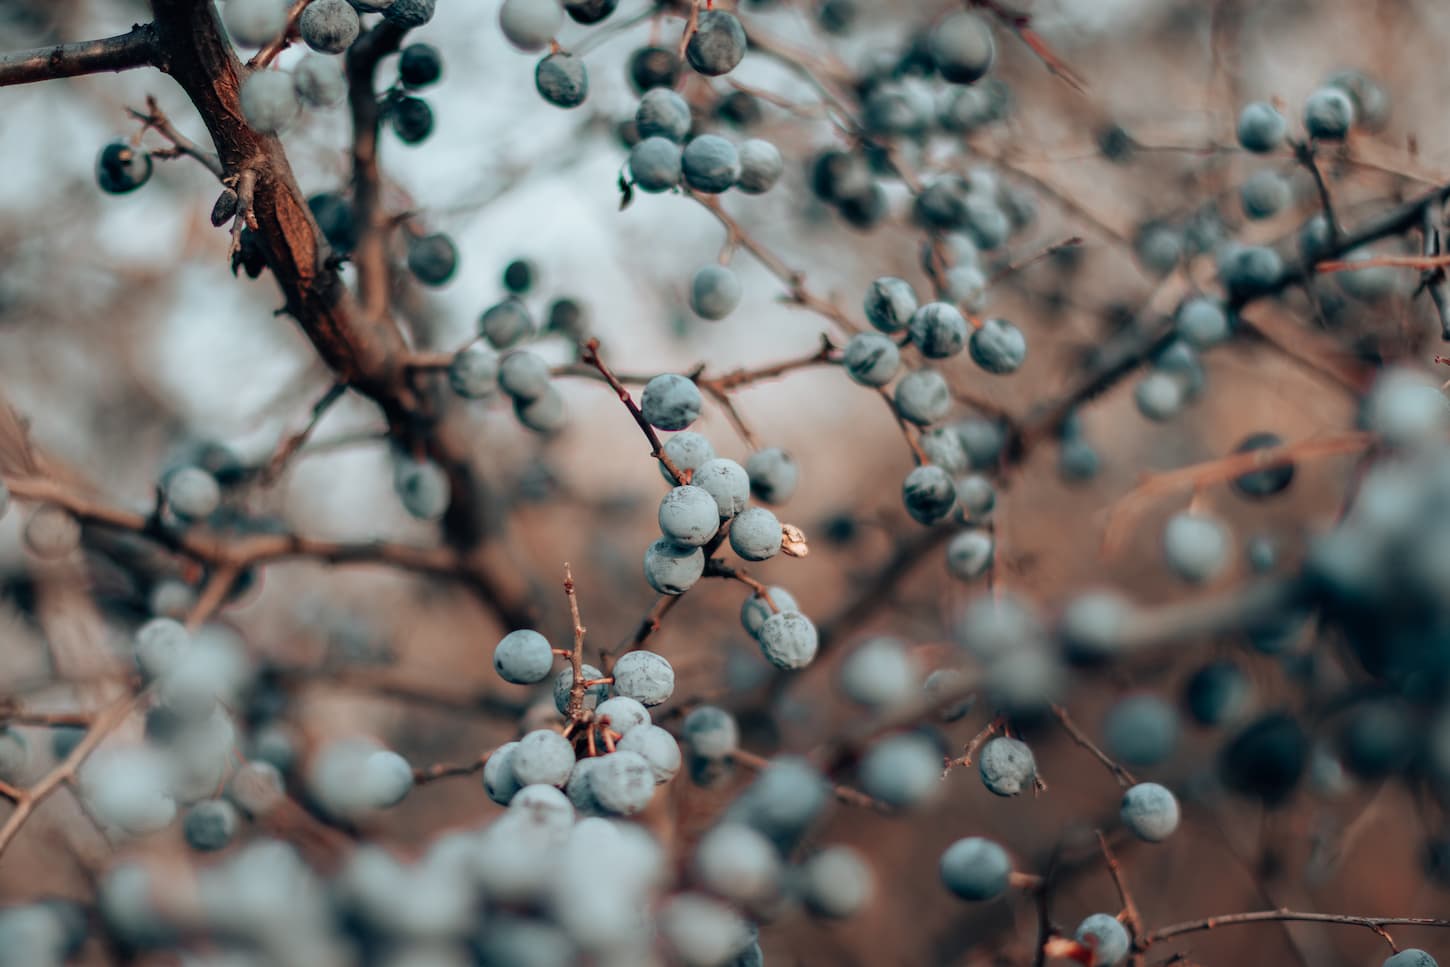 An image of Wild blackthorn. Blue blackthorn berries on the branch in the late fall.